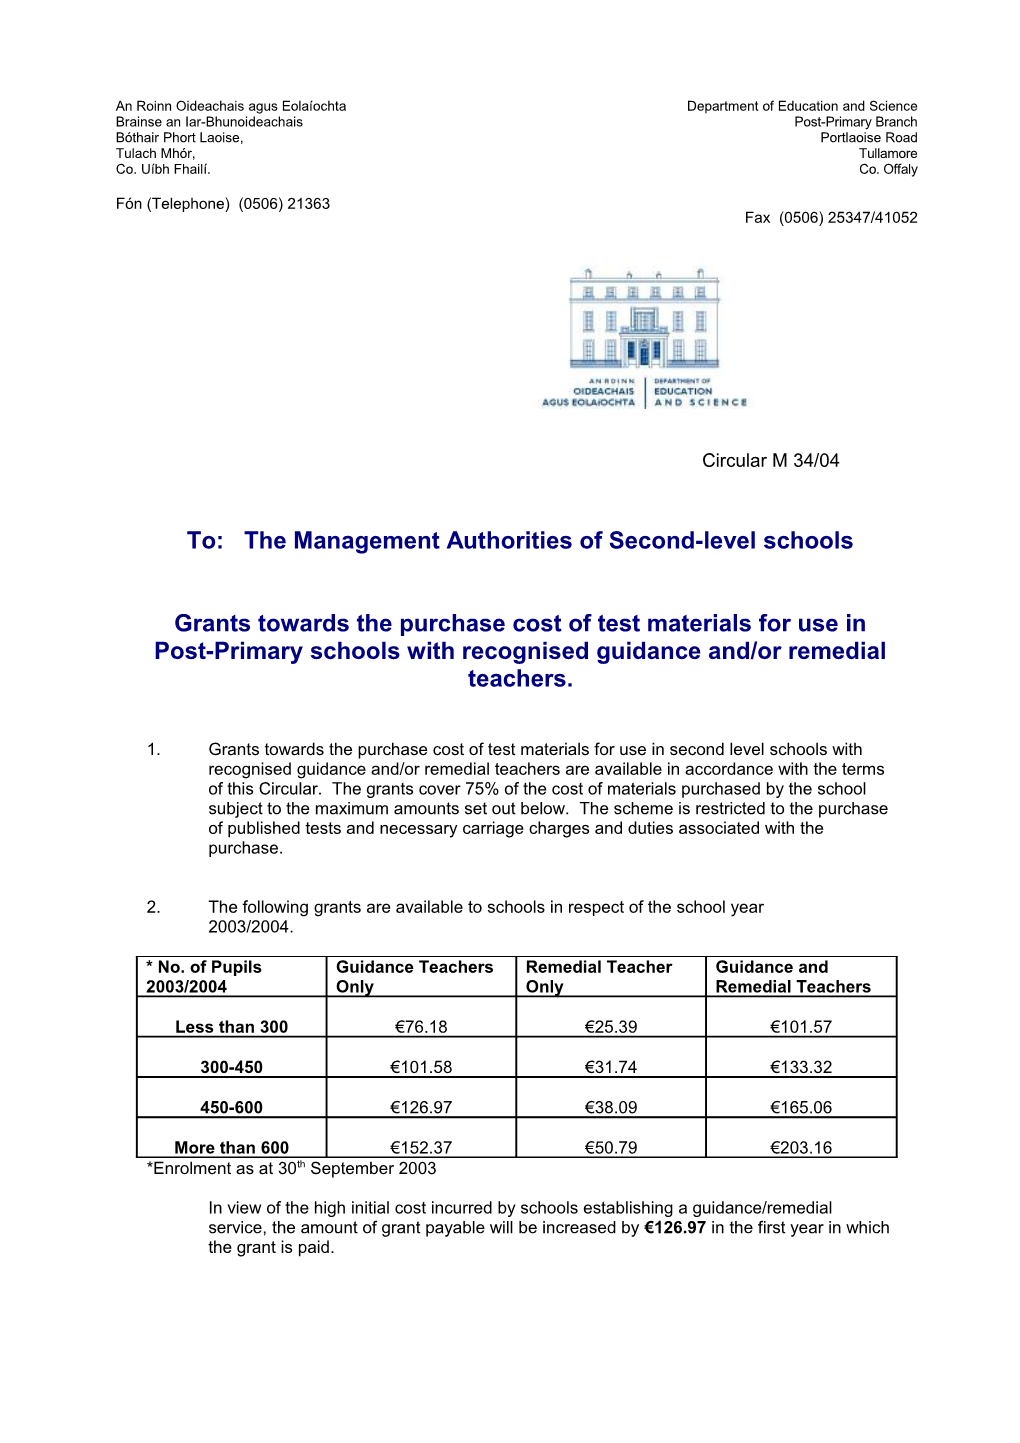 Circular M34/04 - Grants Towards the Purchase Cost of Test Materials for Use in Post-Primary